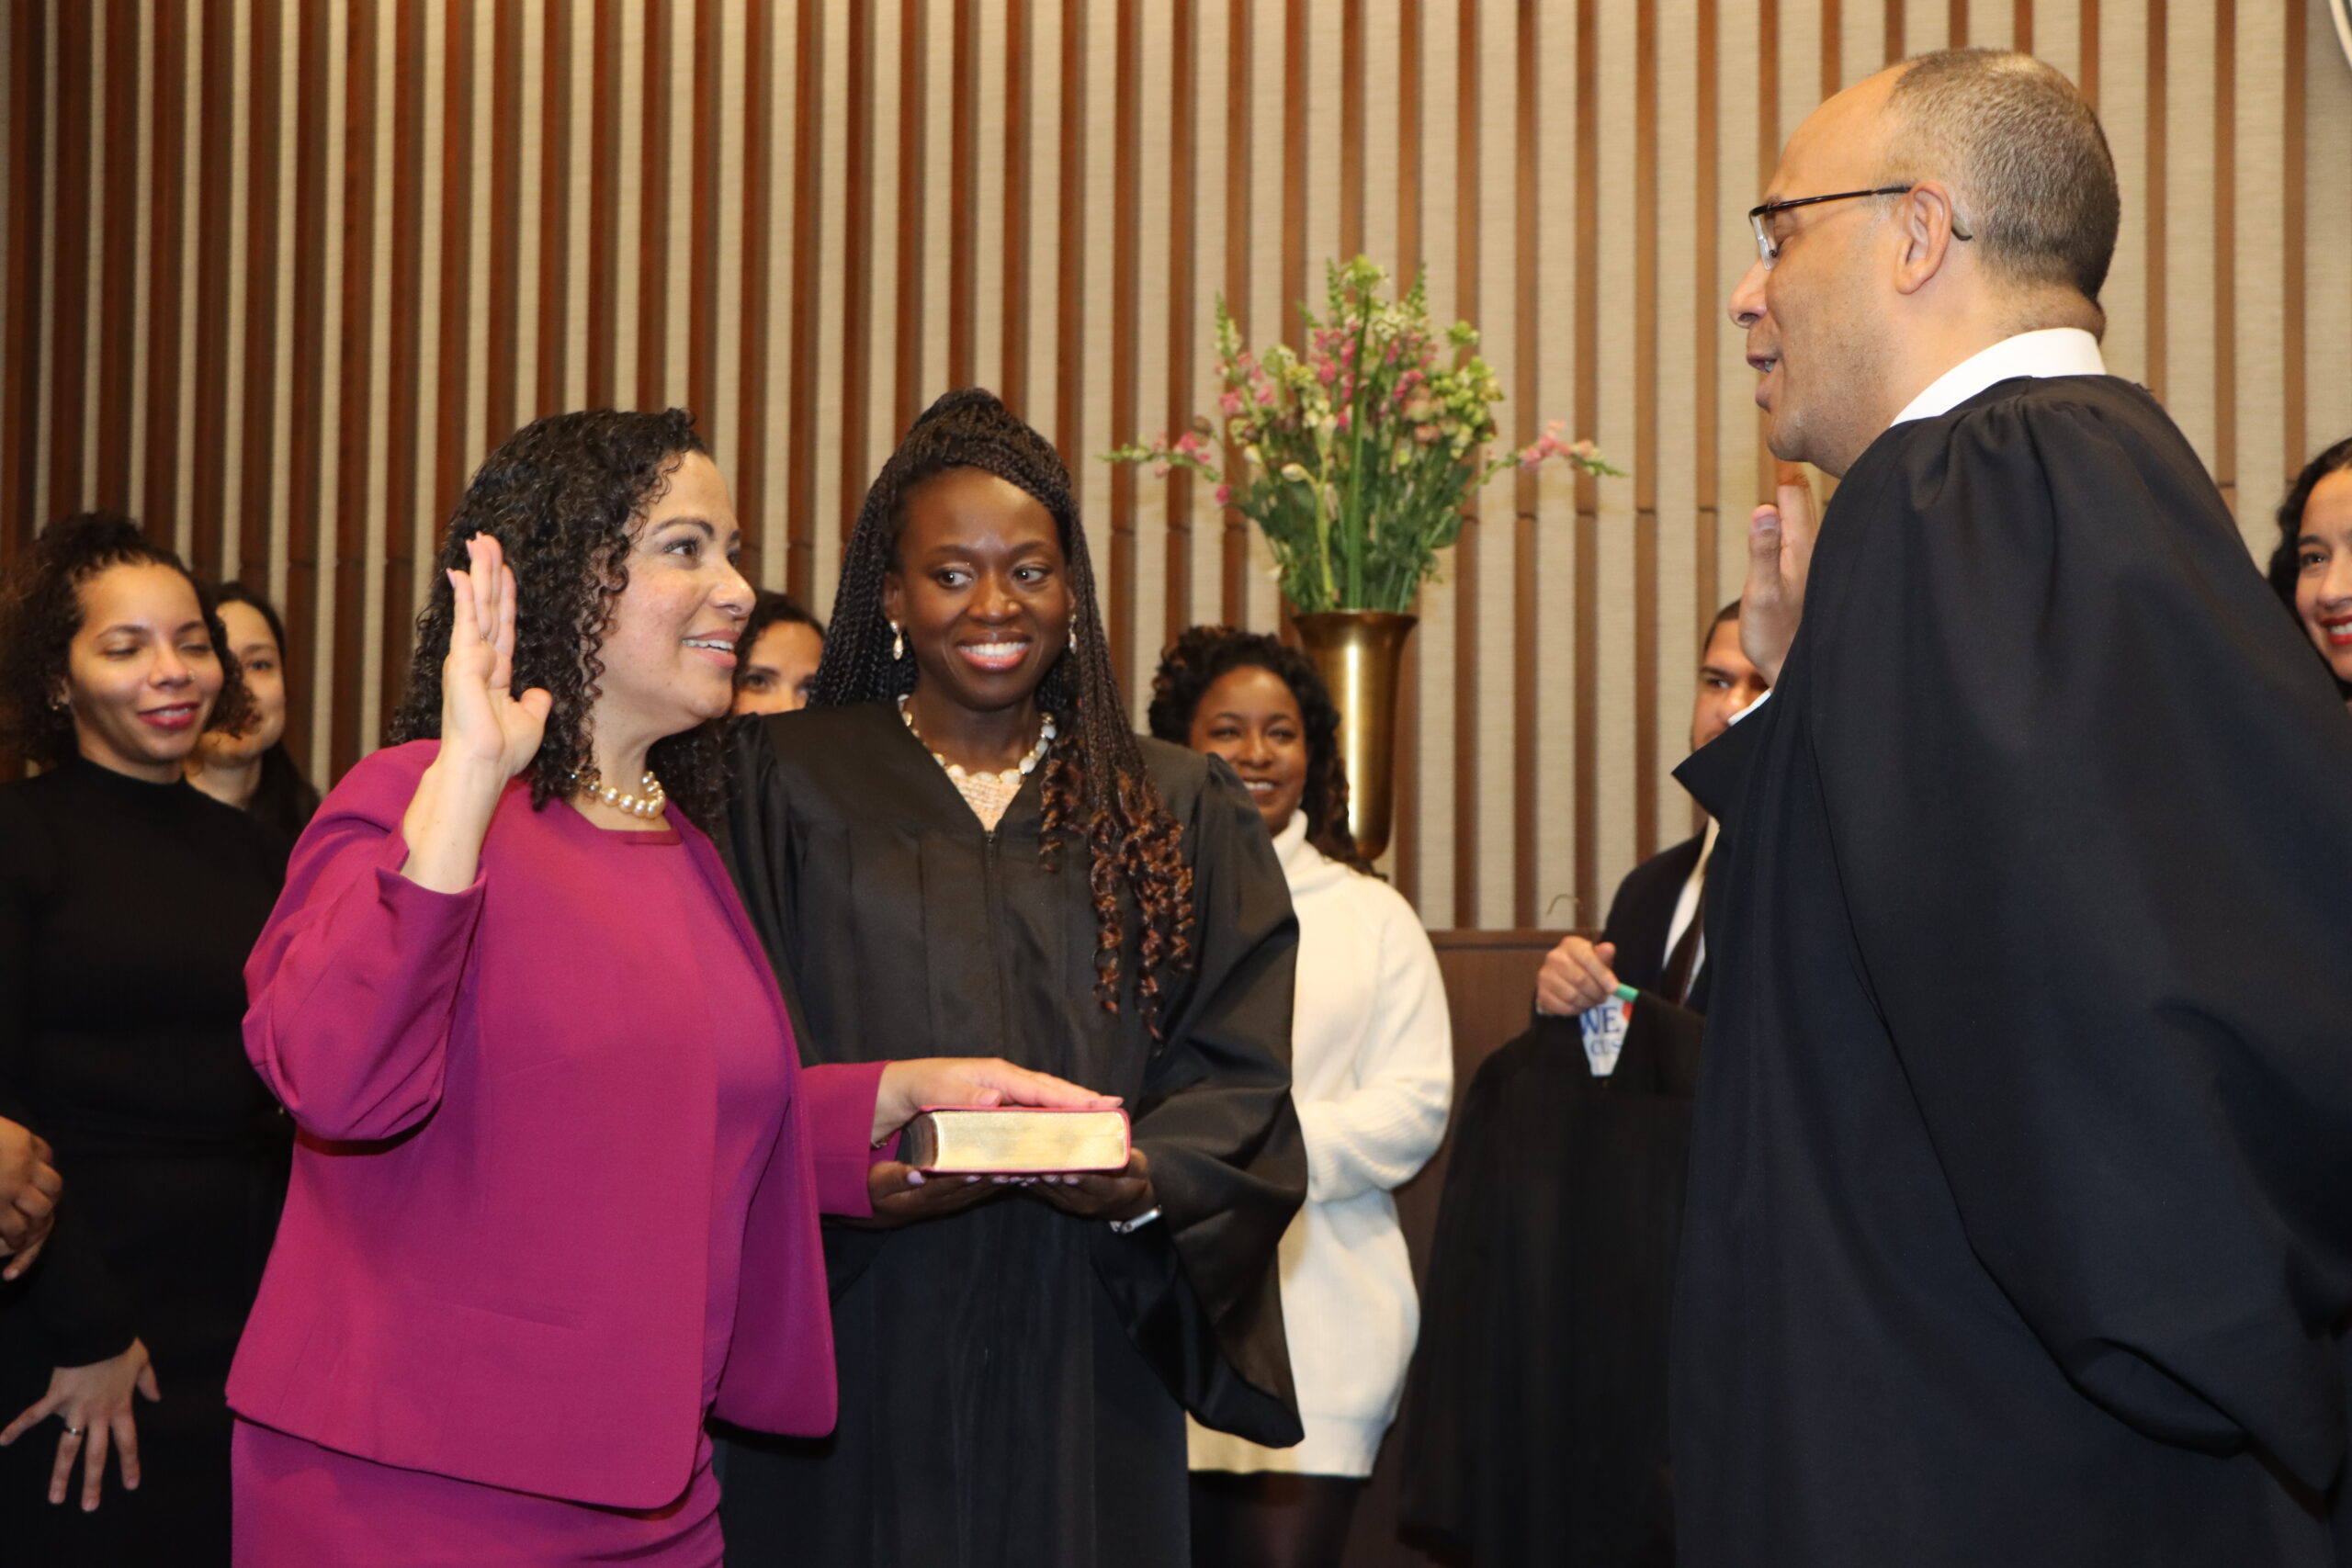 Justice Joanne Quiñones, pictured here being installed by Hon. Hector LaSalle as a Kings County Supreme Court justice this past February, is a proud advocate for diversity within the legal system. Her commitment to equity and inclusion is a cornerstone of her judicial philosophy, influenced by her upbringing in Brooklyn's Bushwick neighborhood. Brooklyn Eagle photo by Mario Belluomo